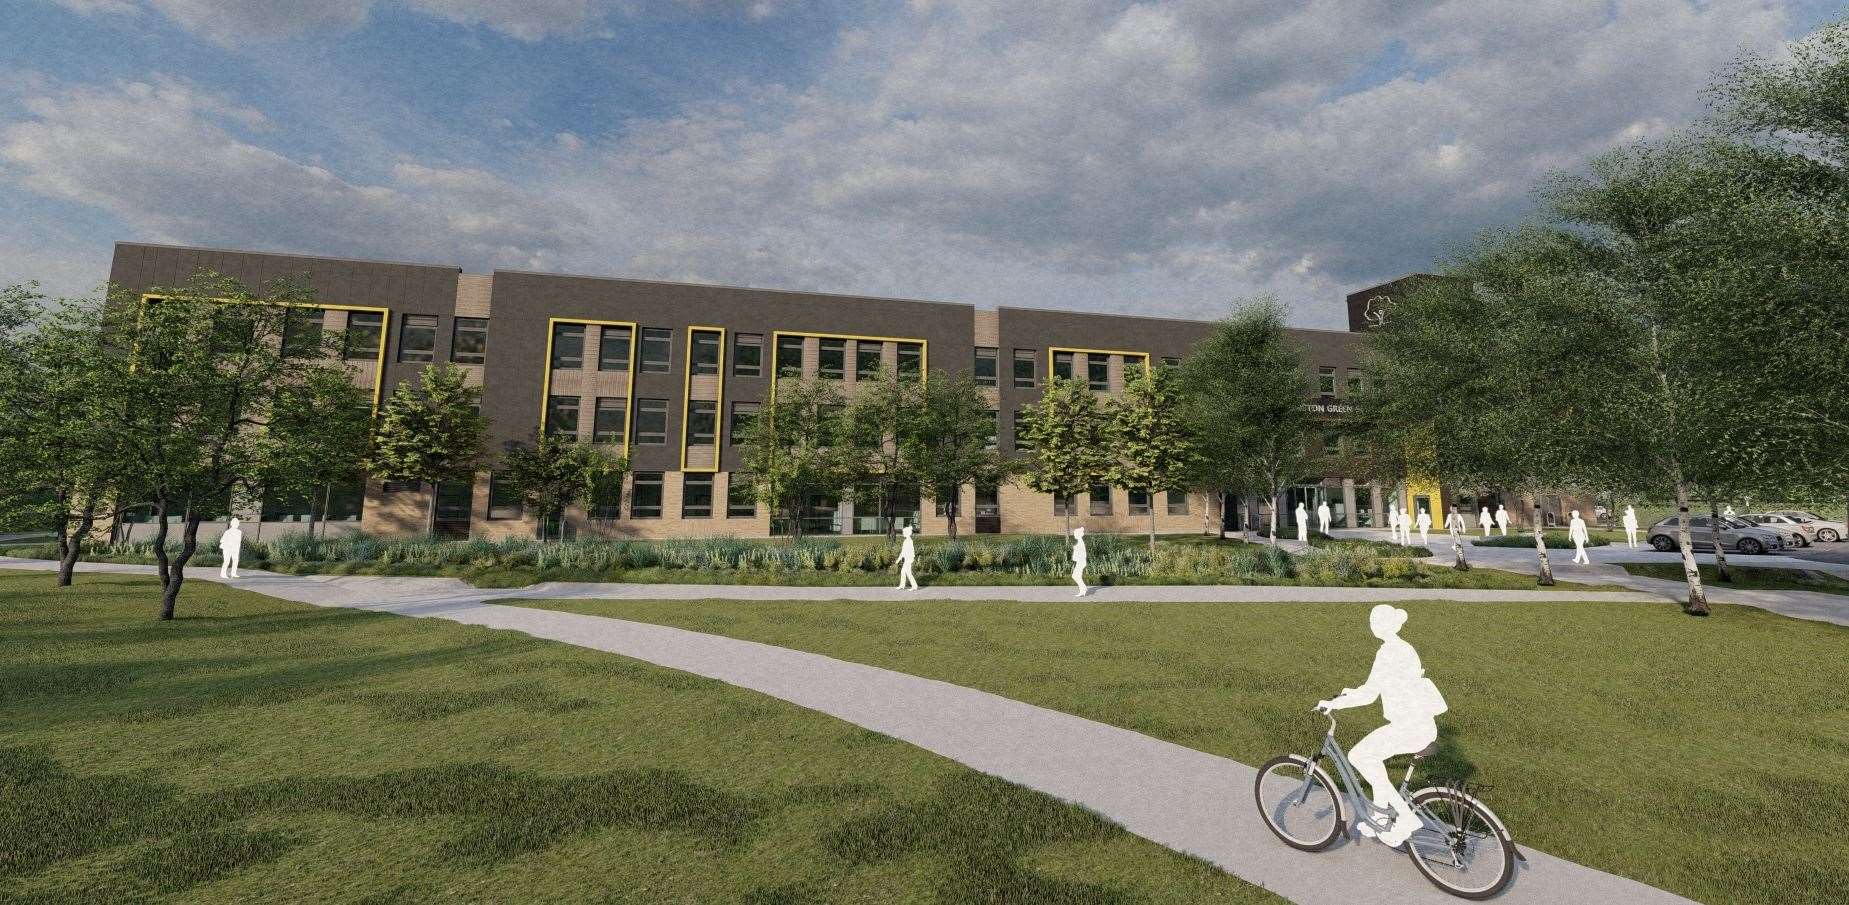 Plans for the Chilmington Green Secondary School have been submitted to Ashford Borough Council